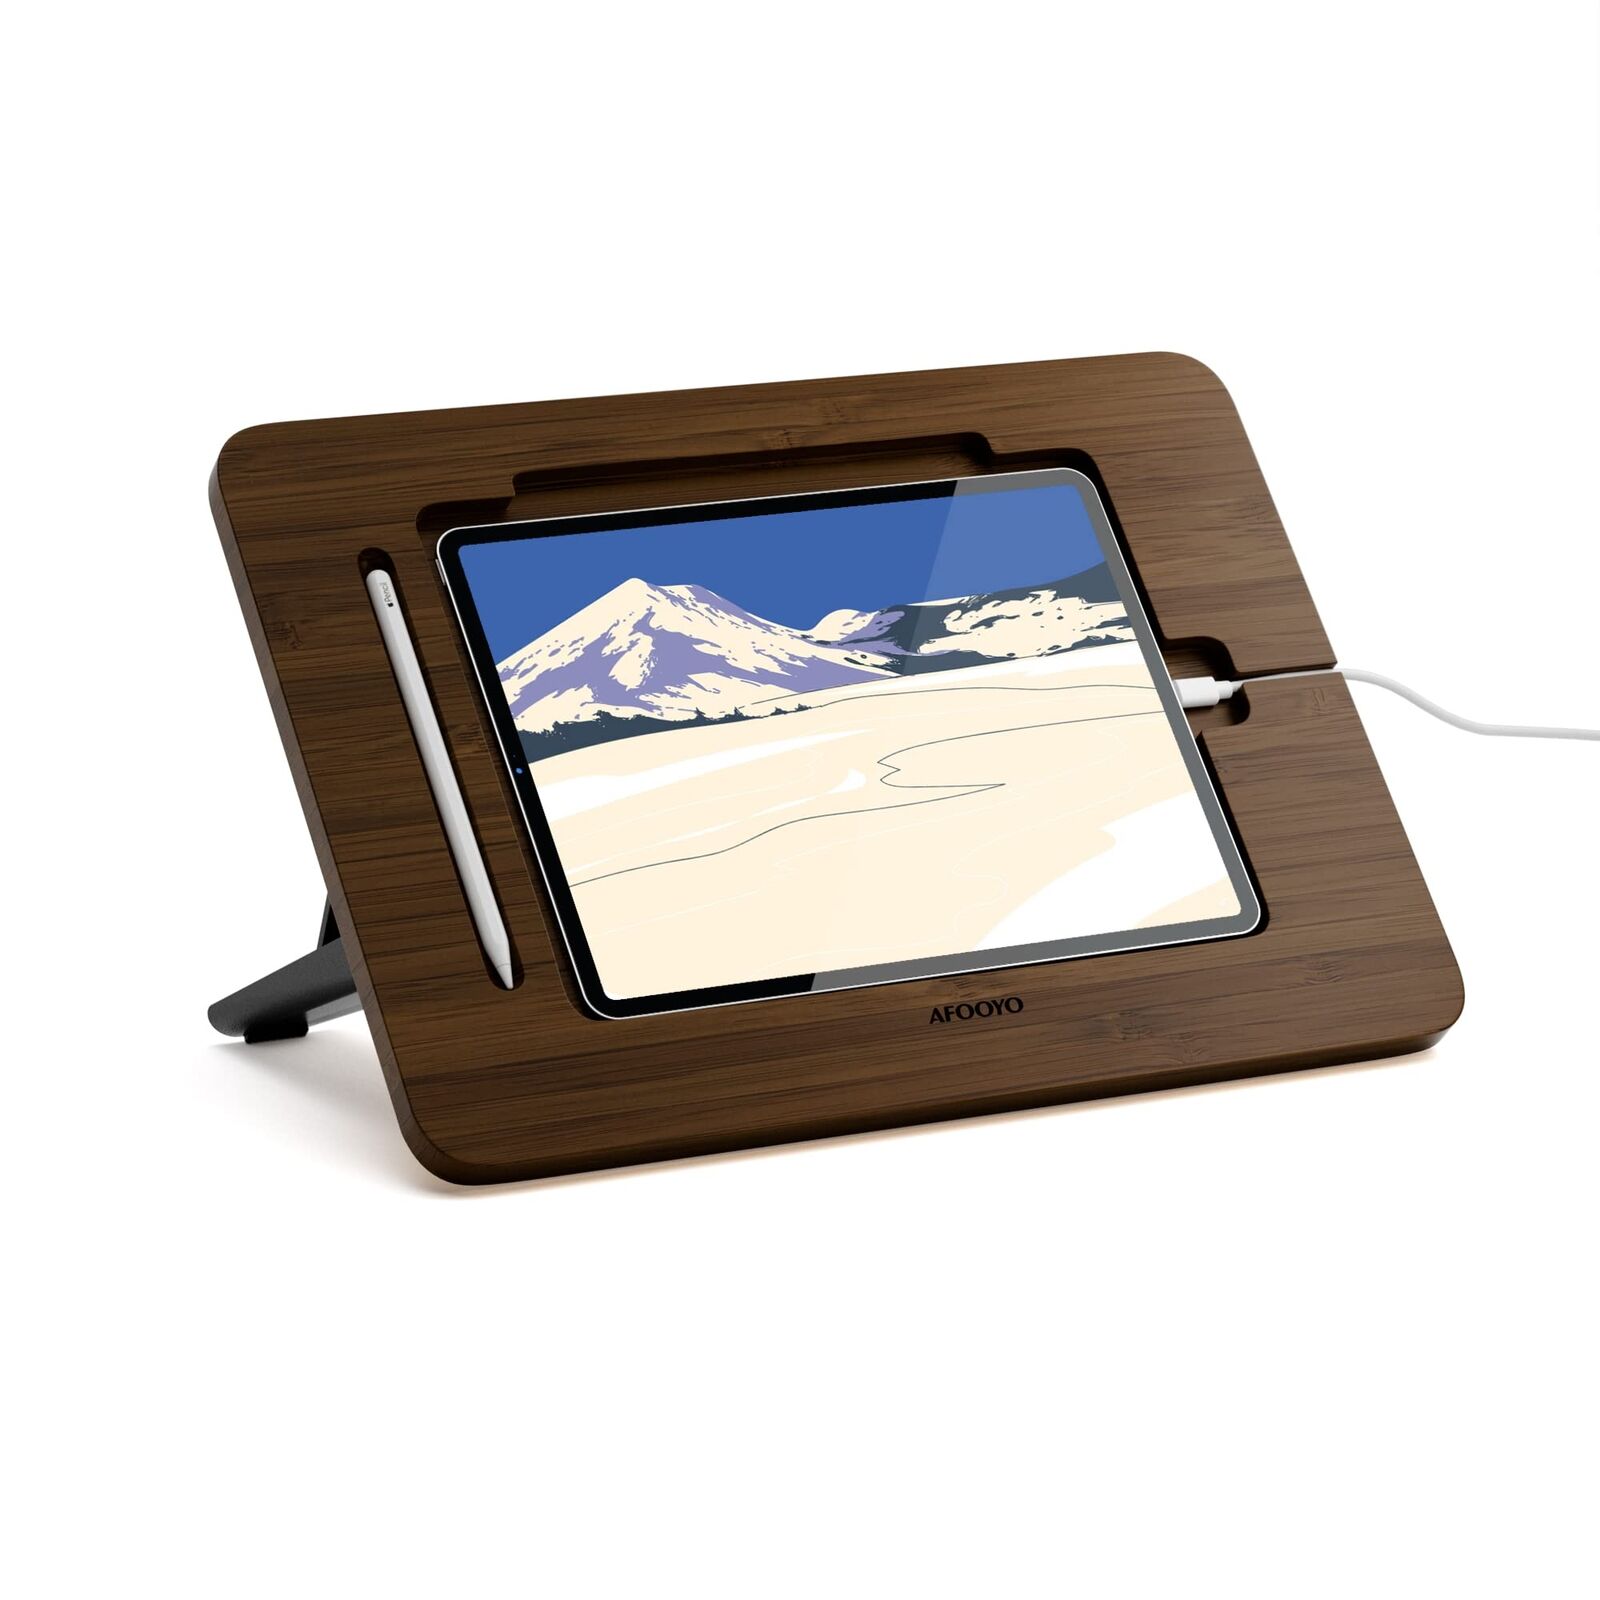 Bamboo iPad Drawing Stand - Portable & Adjustable 5 Angles Laptop Stand Riser...